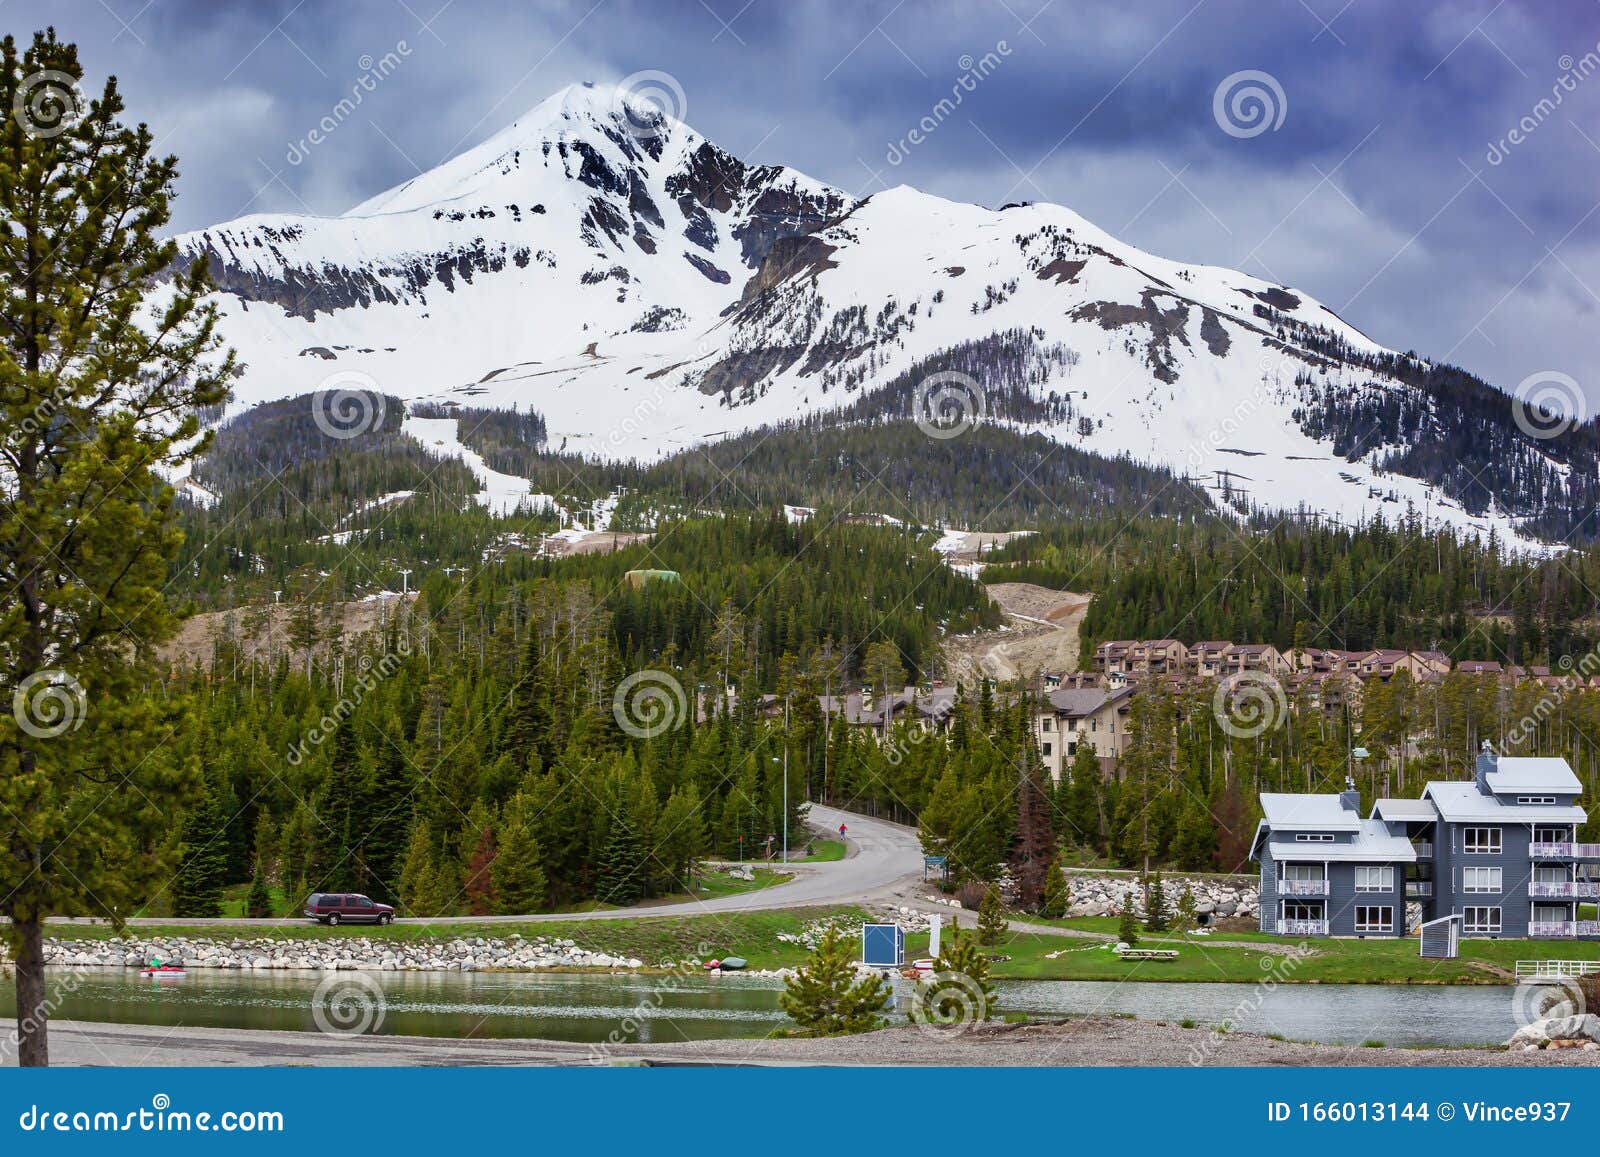 view of lone mountain with buildings and pine trees on the foot of the mountain, big sky, montana, usa